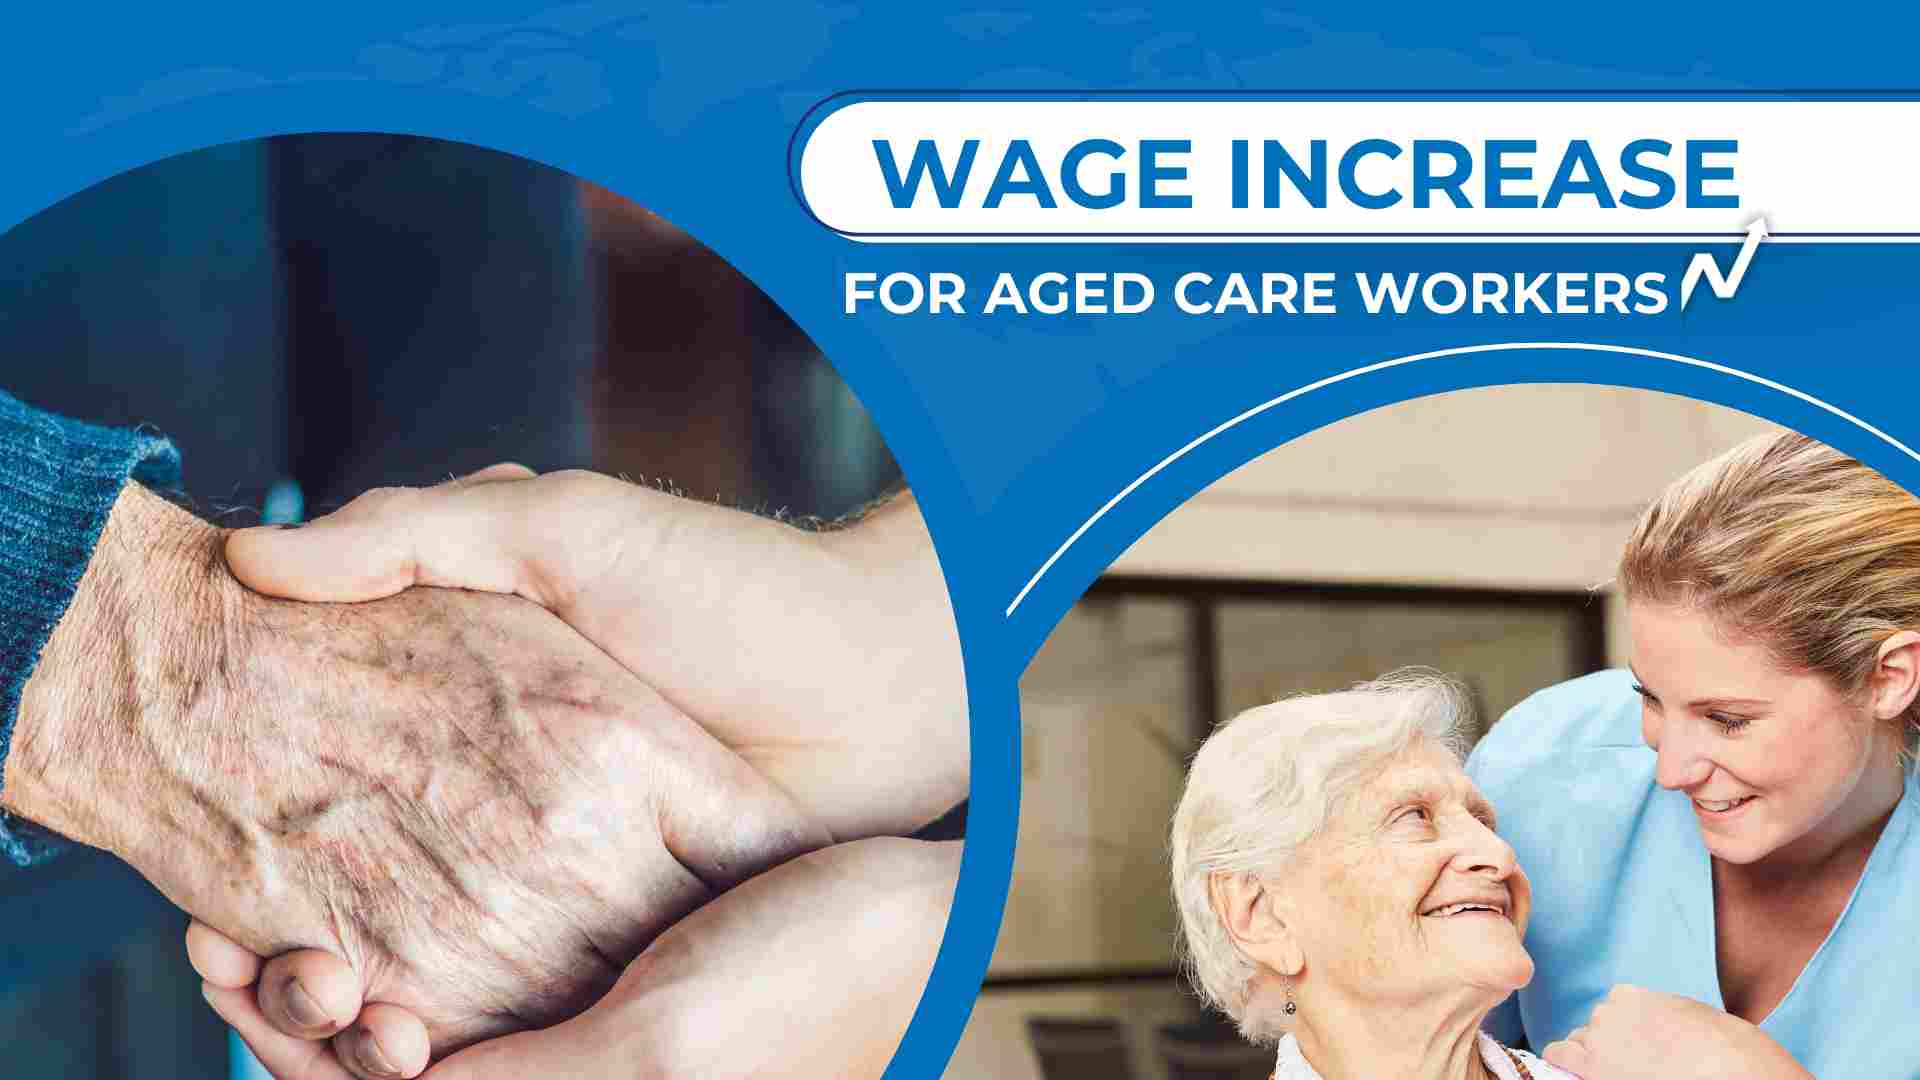 Wage Increase for Aged Care Workers